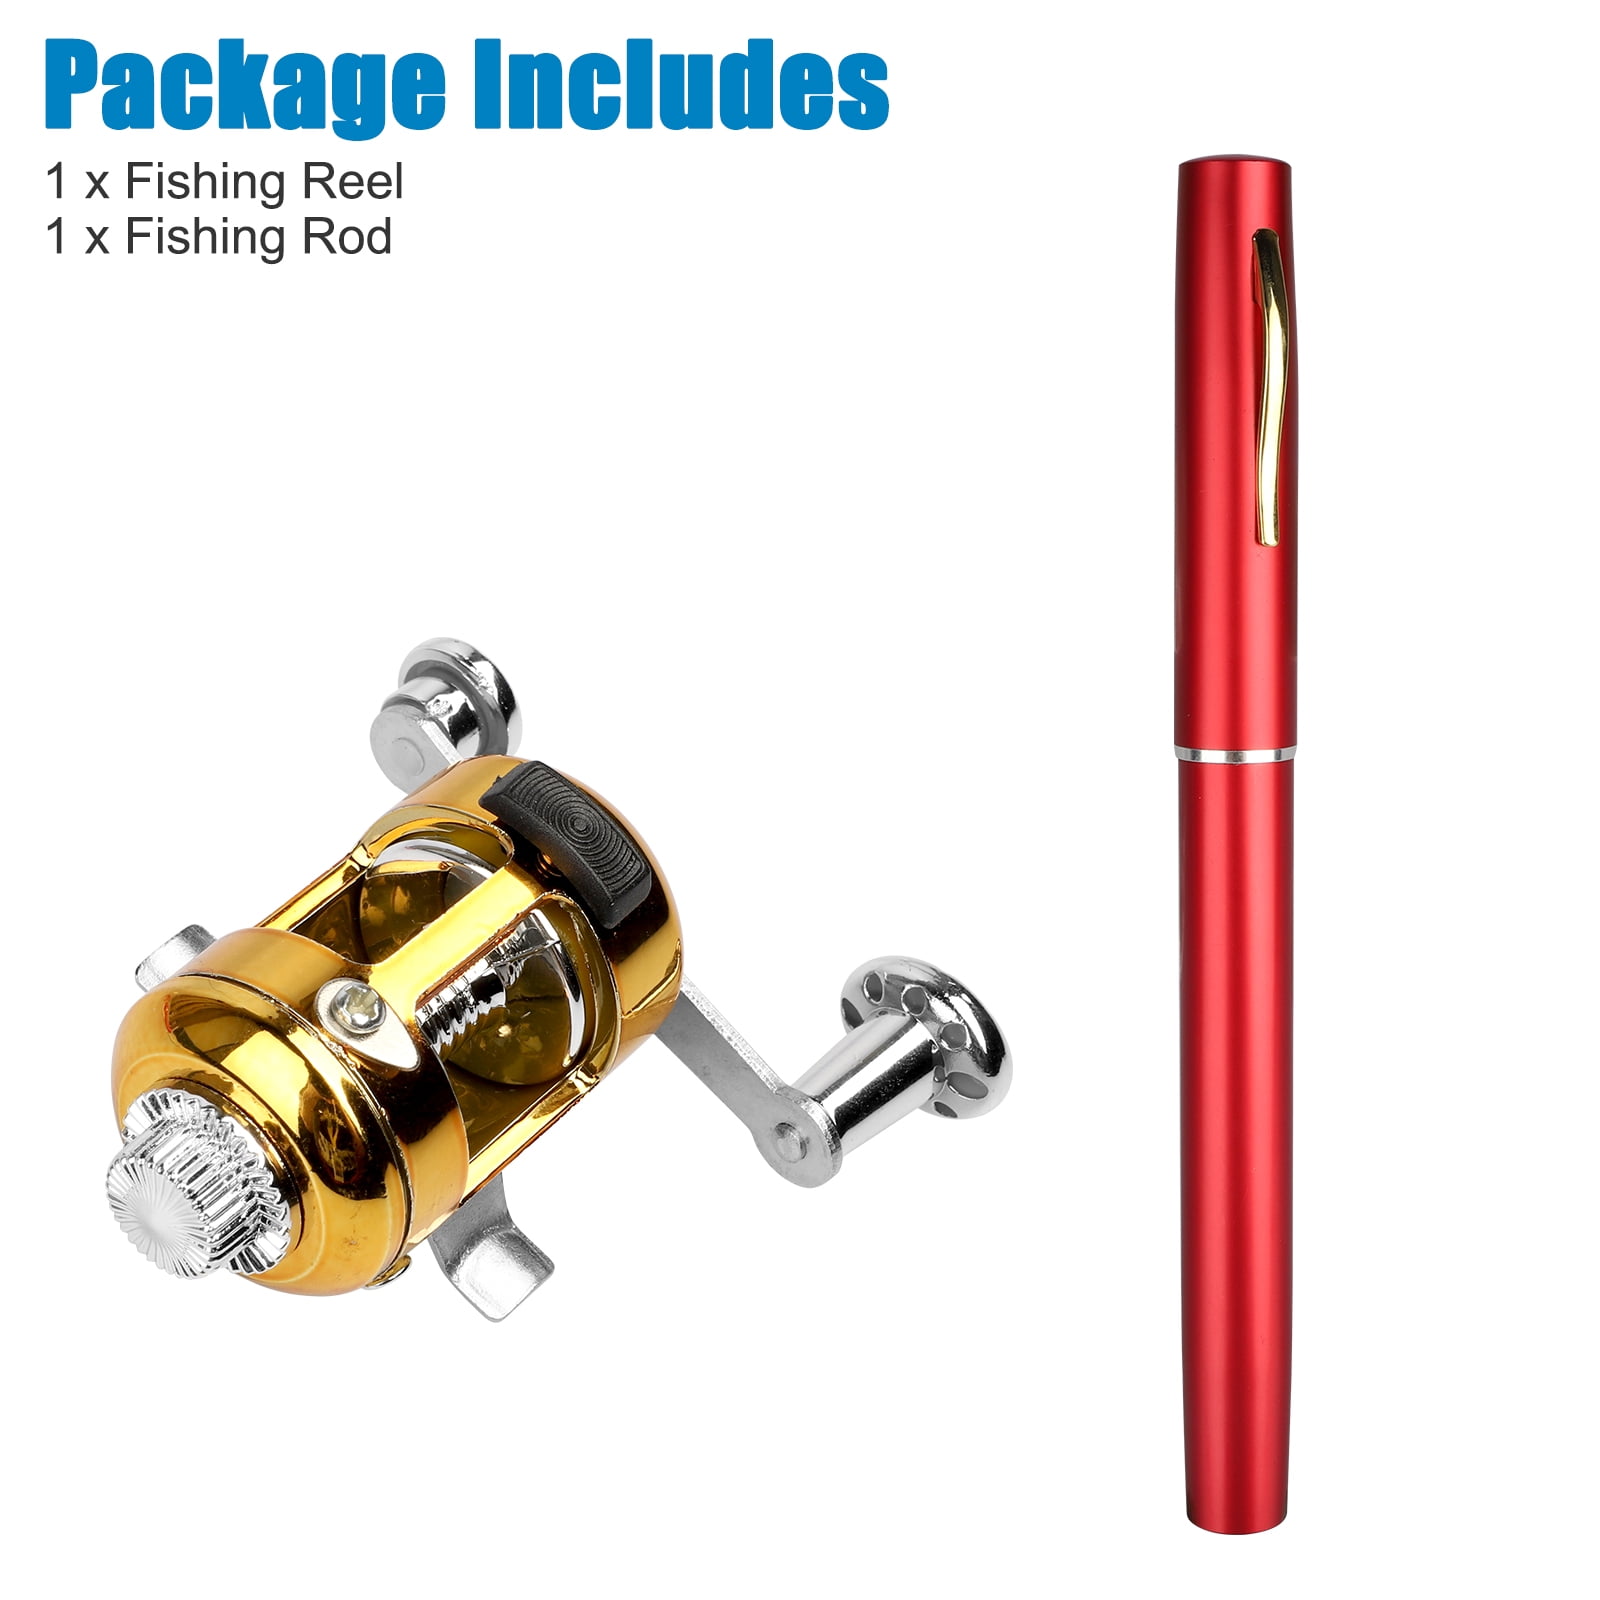  Pen Fishing Rod Kit, 39 Inch Mini Fishing Pole Portable  Telescopic Fishing Rod with Spinning Reel Fishing Rod Reel Combo for Travel  Saltwater Freshwater Sea : Sports & Outdoors